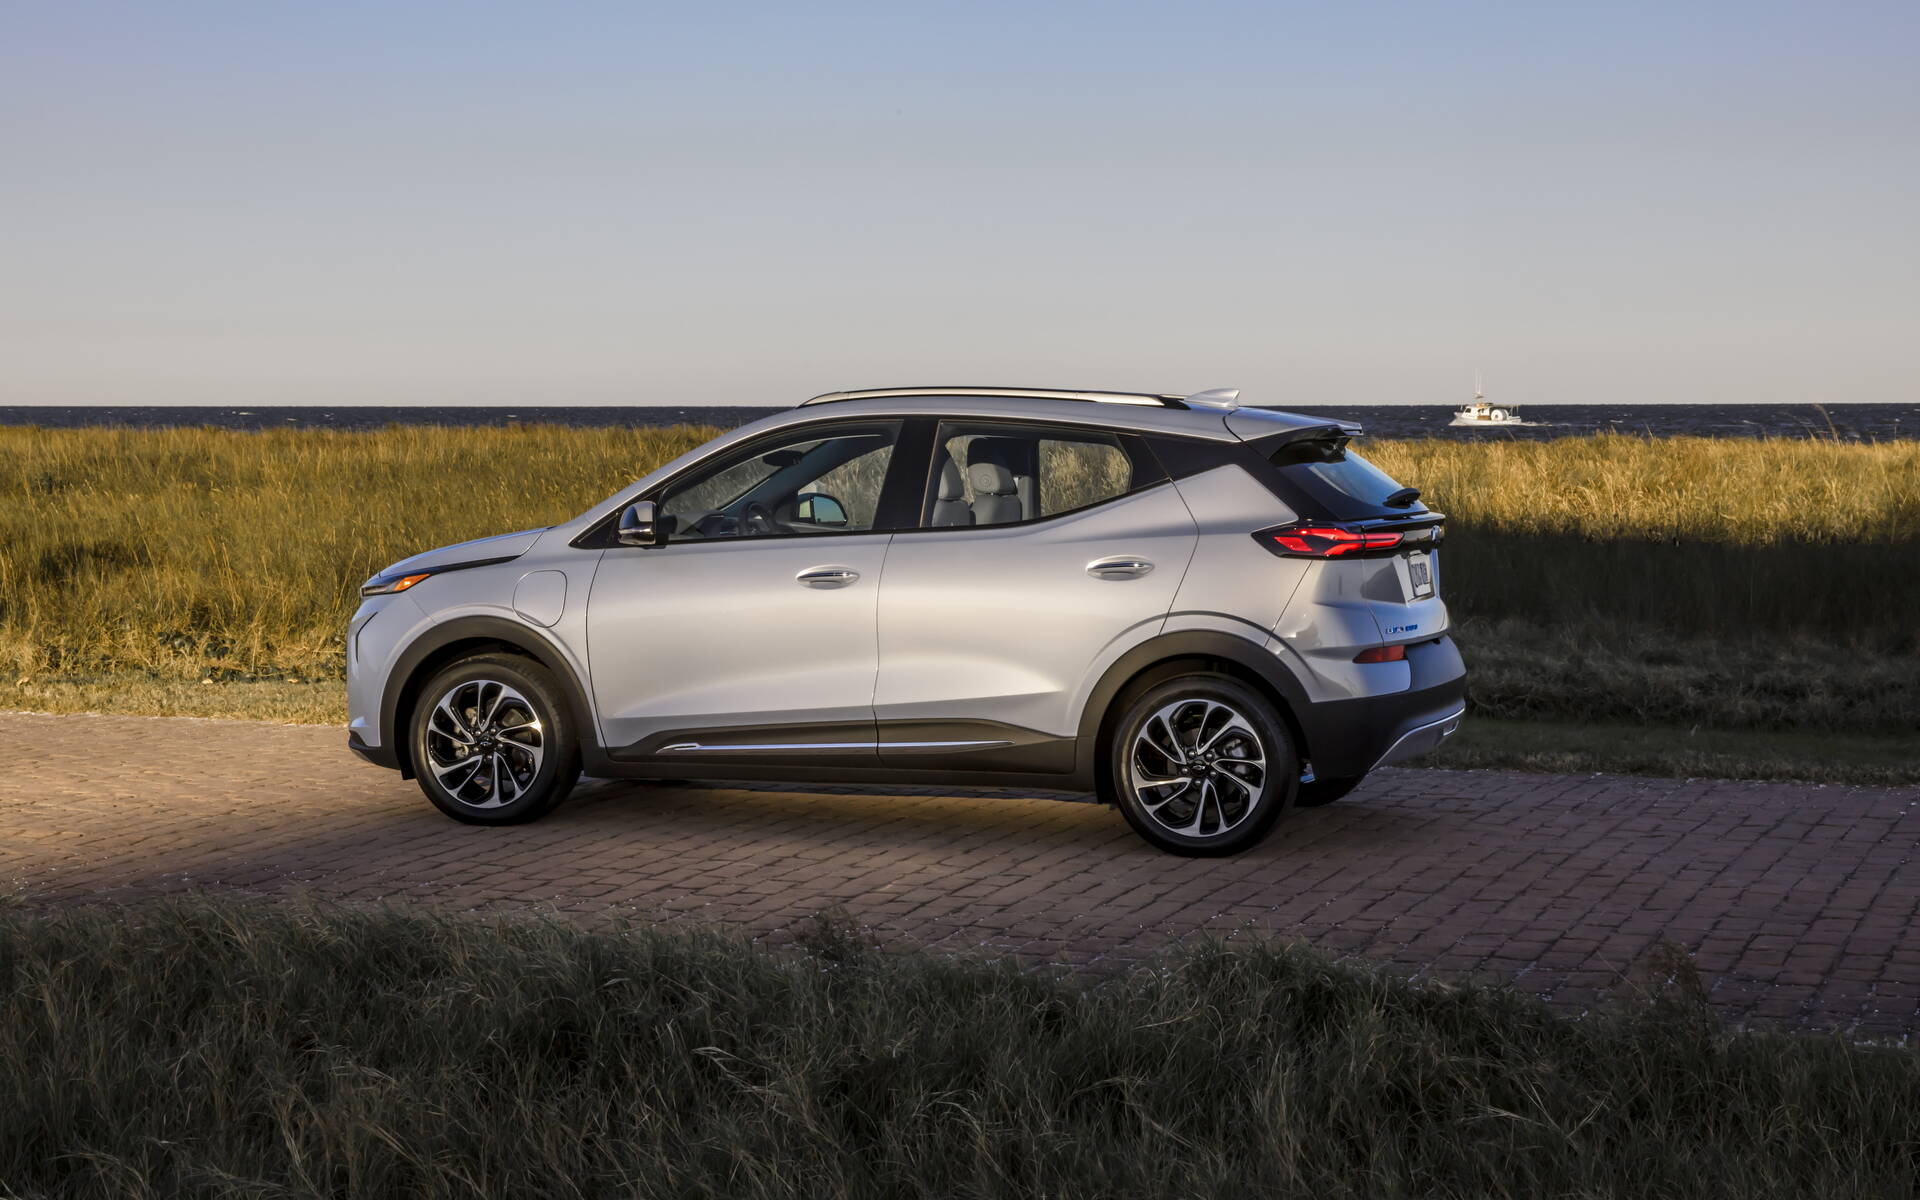 Chevrolet Bolt EV vs. Bolt EUV What’s the Difference?